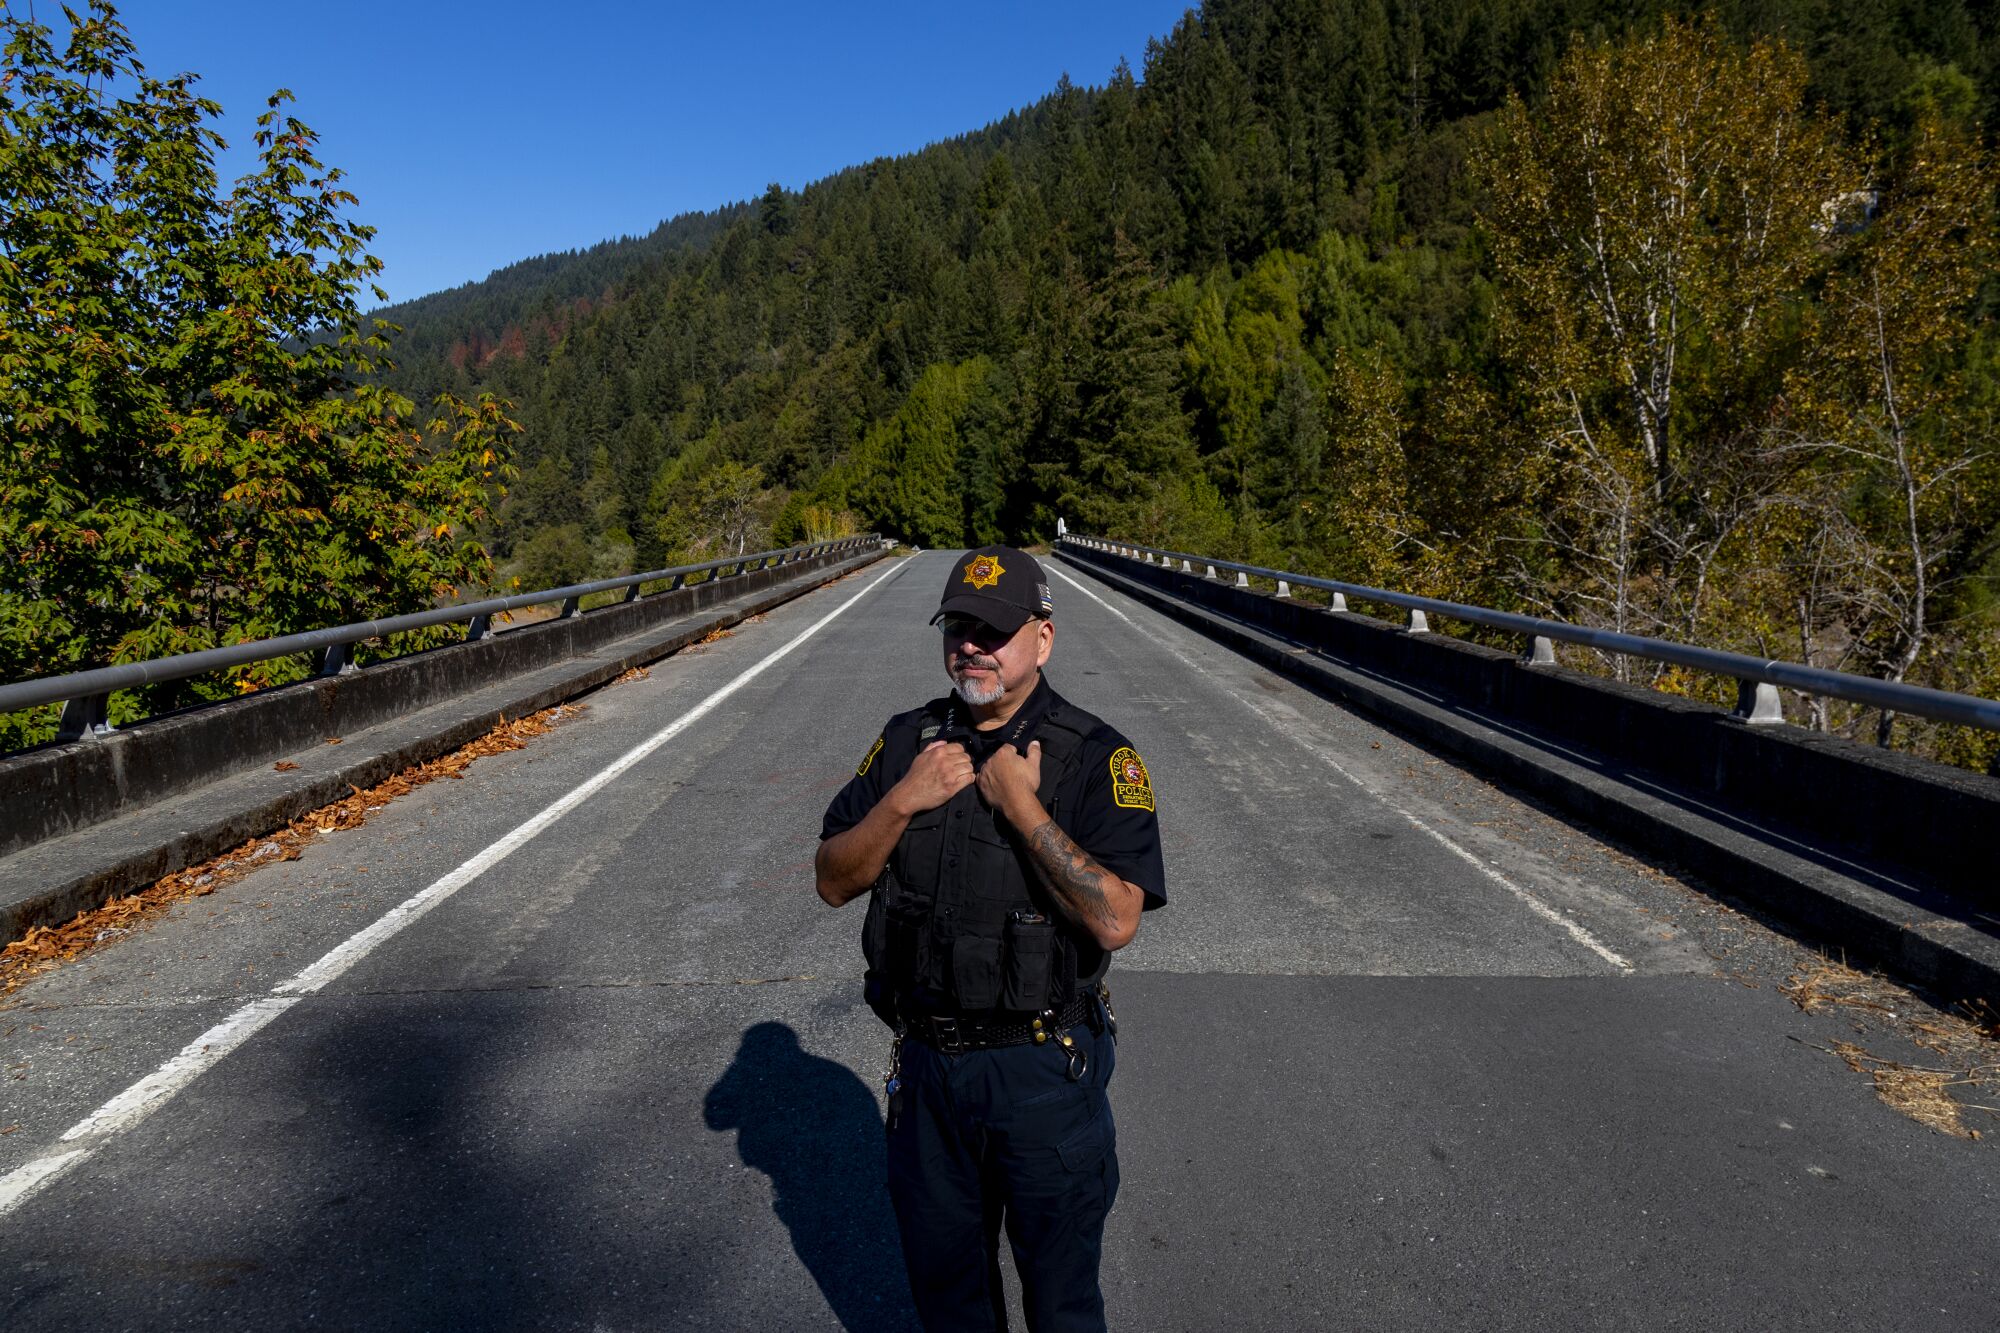 Yurok Tribal Police Chief Greg O'Rourke stands on a road bridge surrounded by a pine-tree forest.